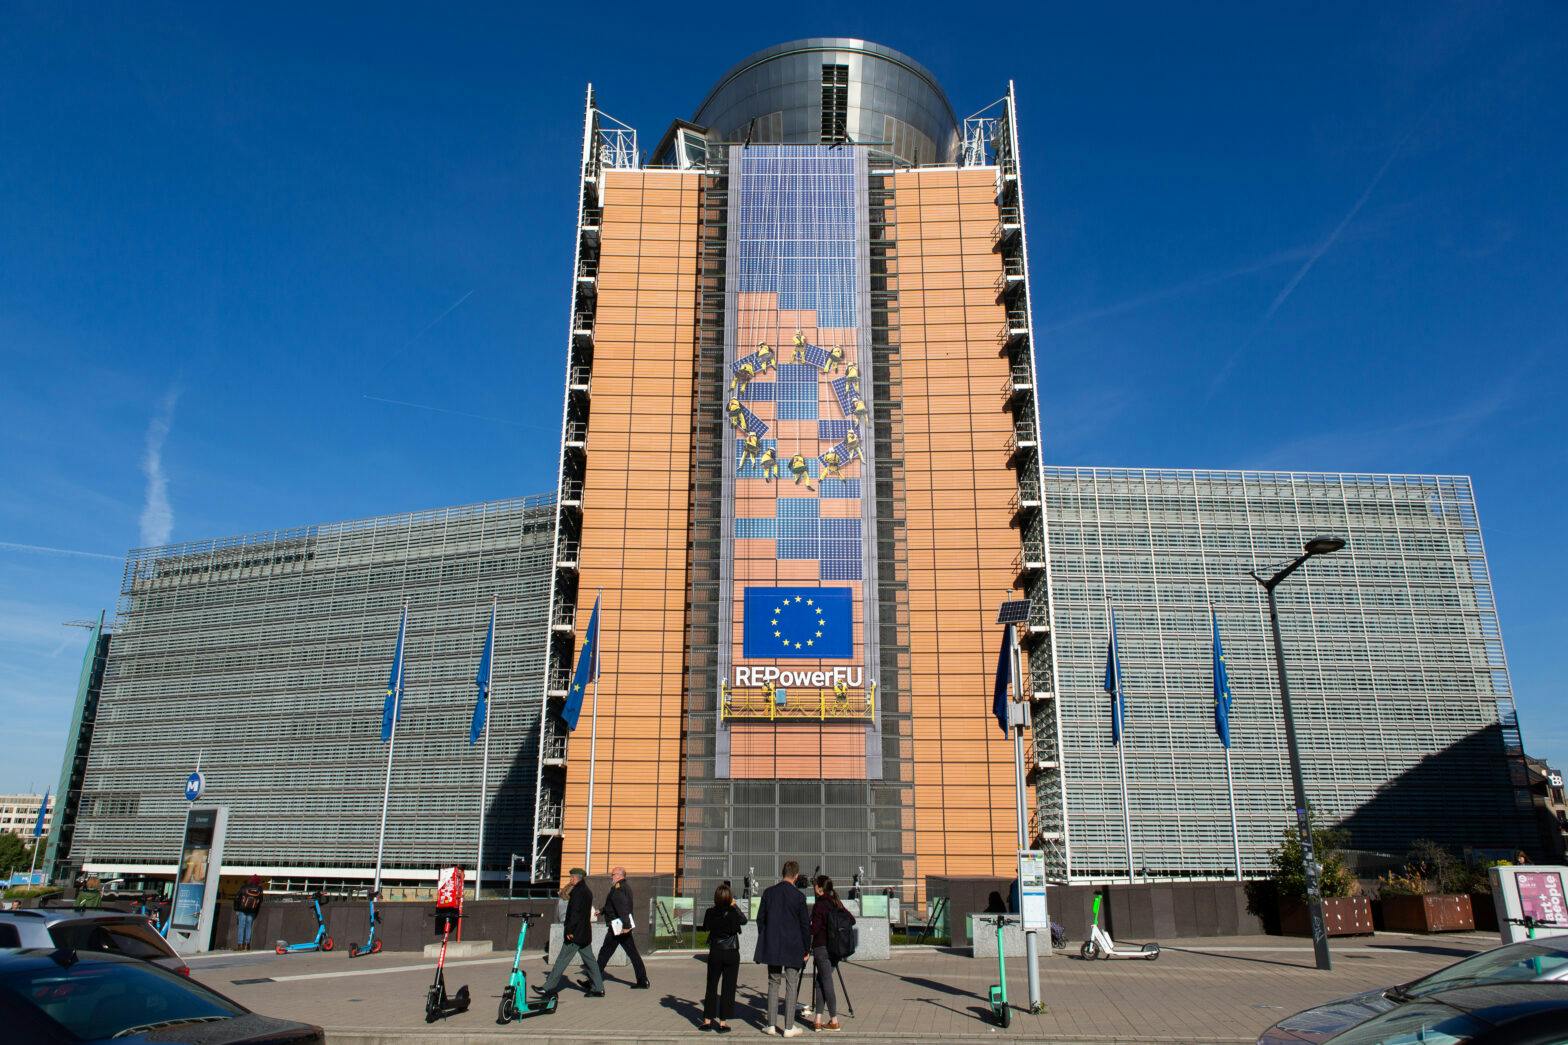 The RePowerEU banner on the front of the Berlaymont building